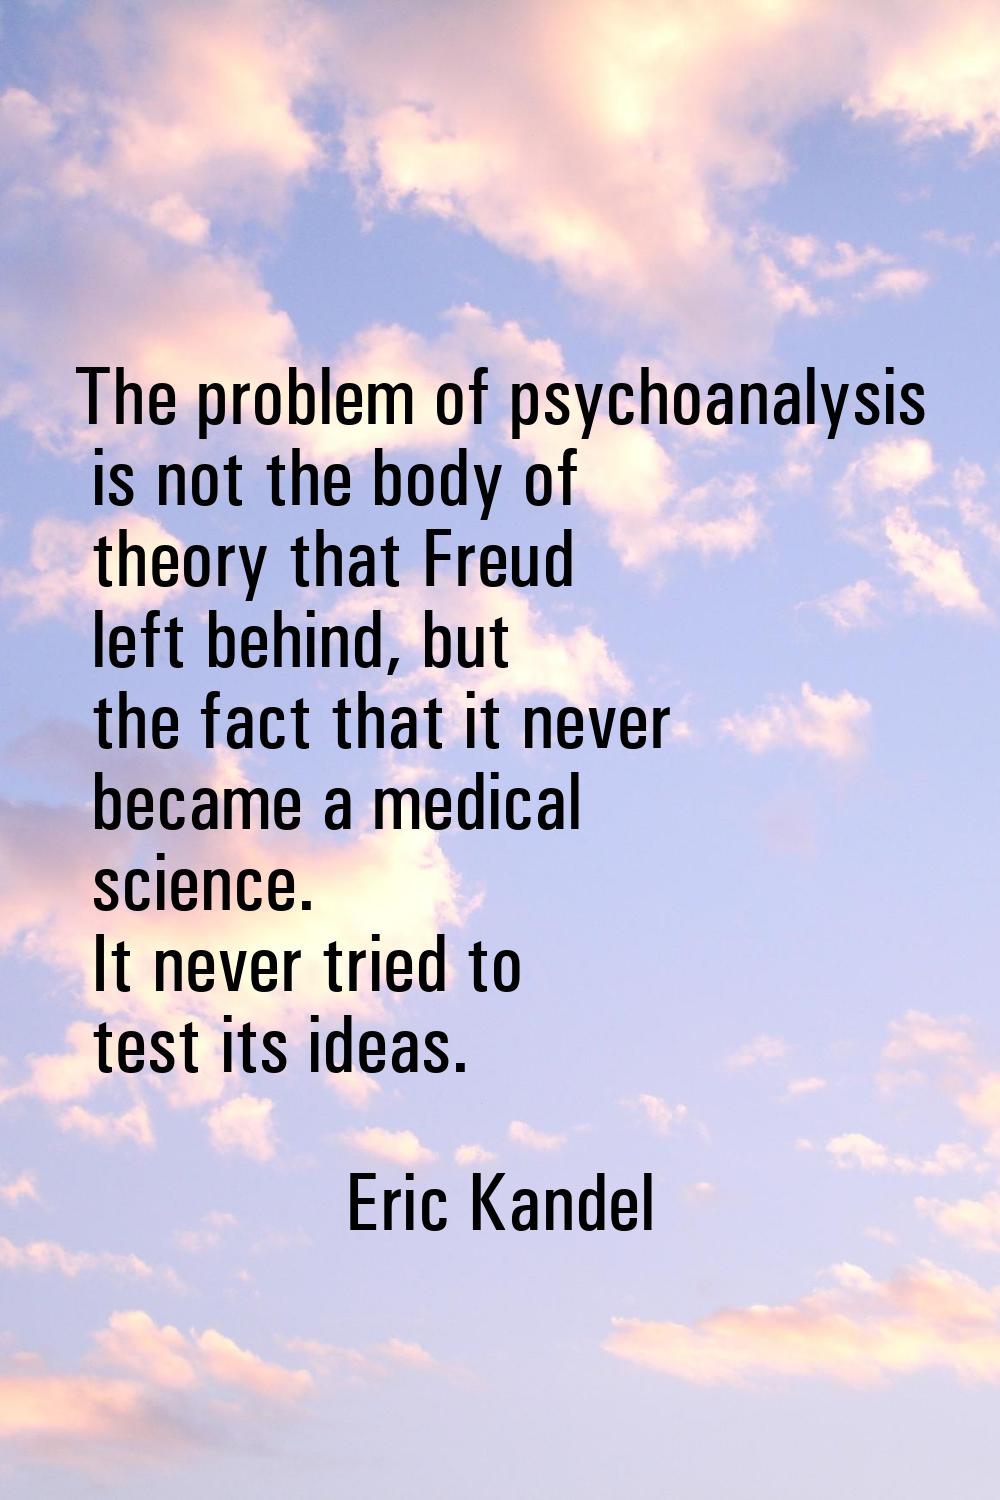 The problem of psychoanalysis is not the body of theory that Freud left behind, but the fact that i